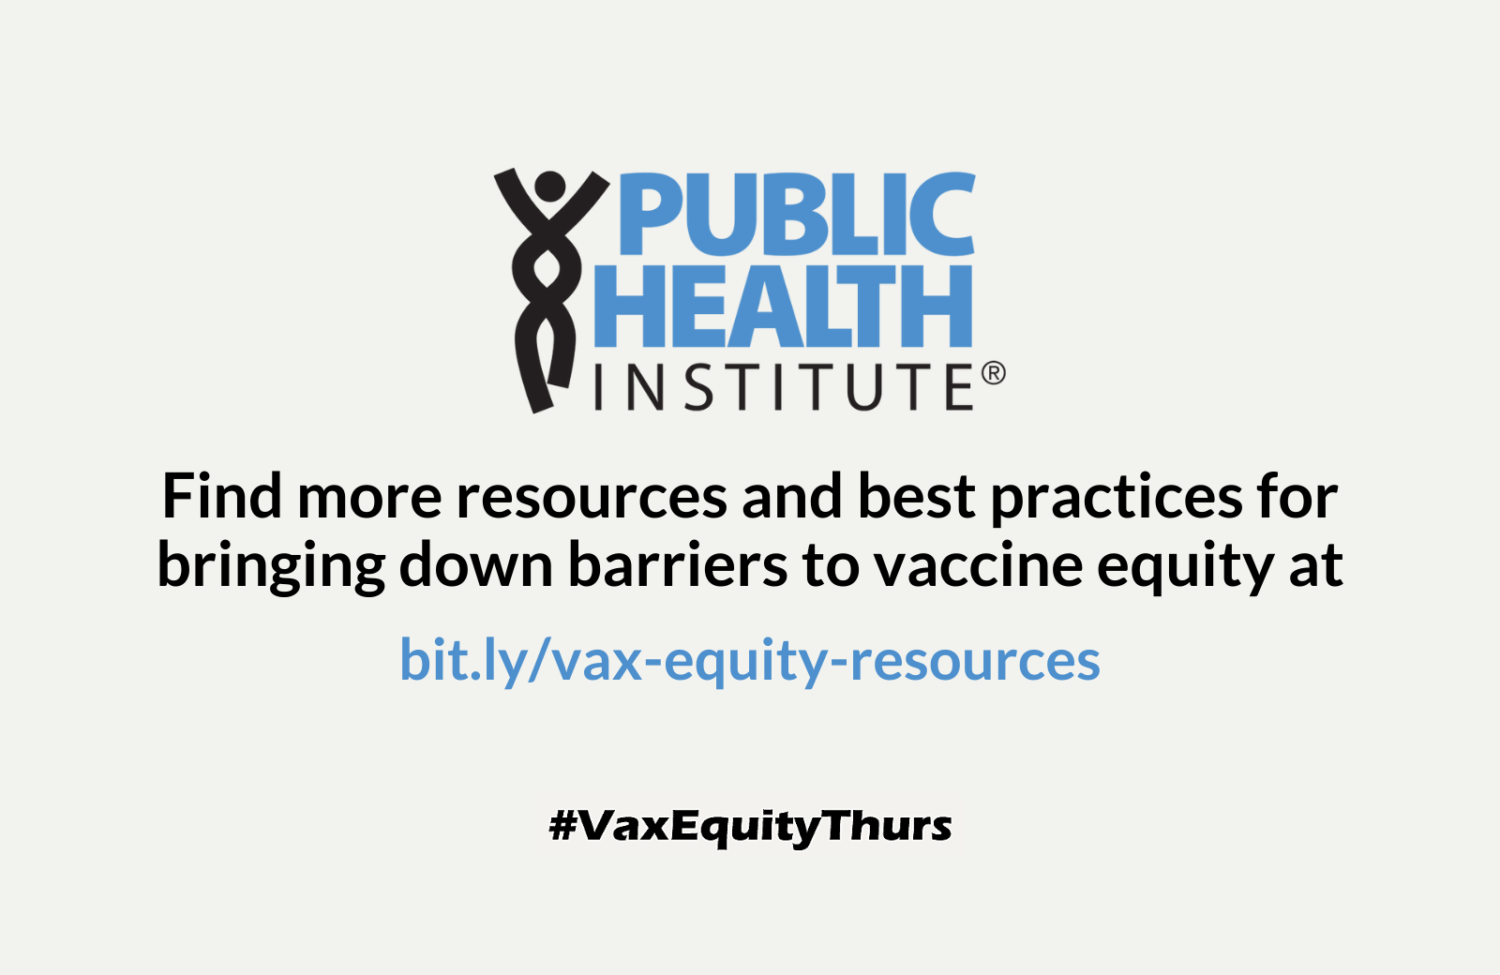 Find more vaccine equity tips on PHI's website